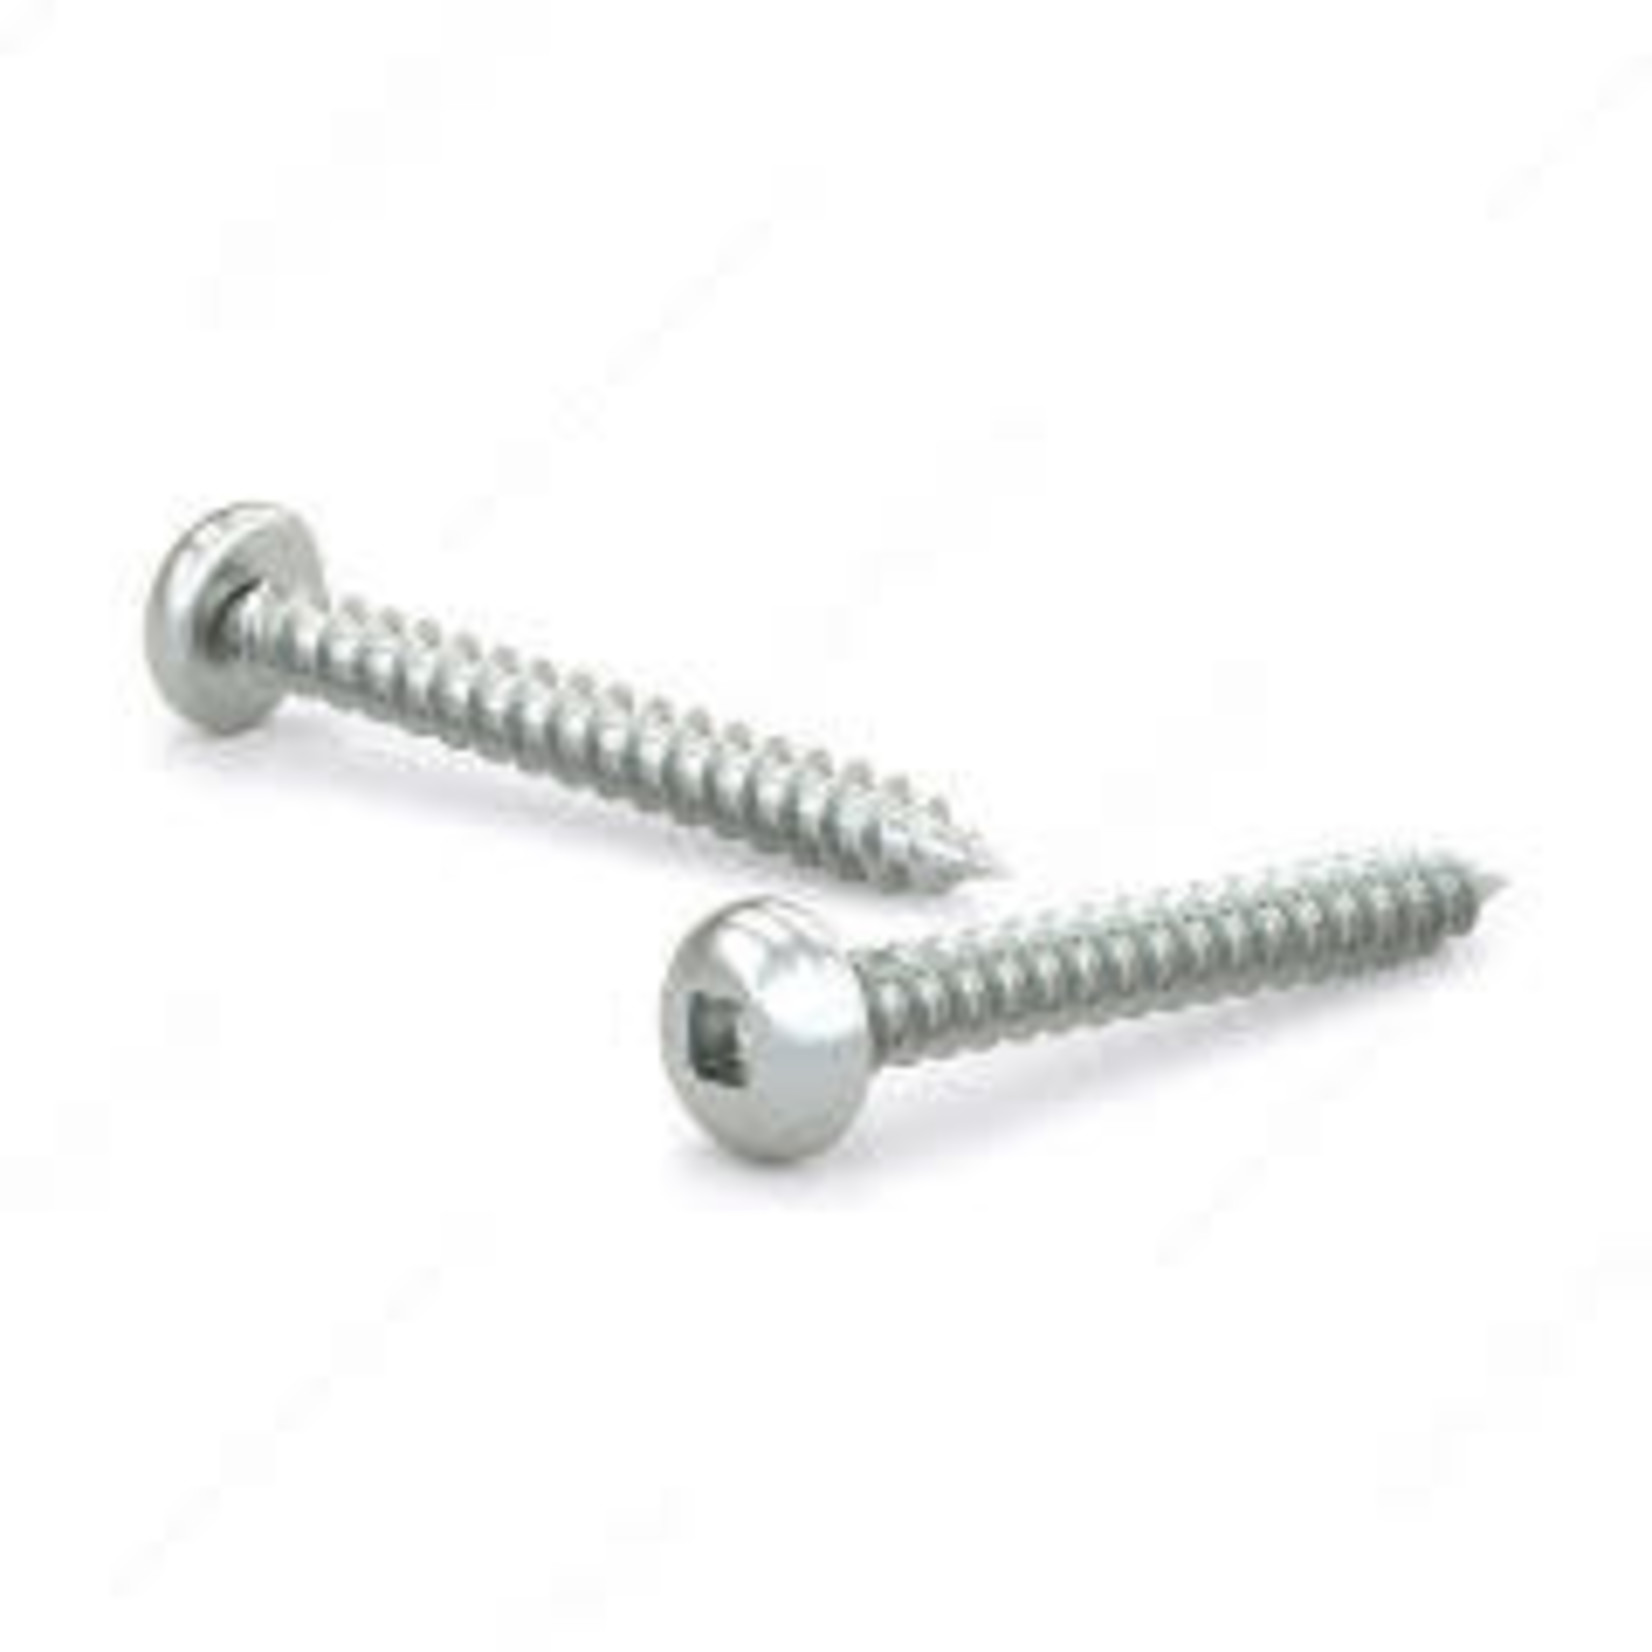 RELIABLE METAL SCREW, PAN HEAD, SELF-TAPPING #6 3/8IN, 18PK BLISTER